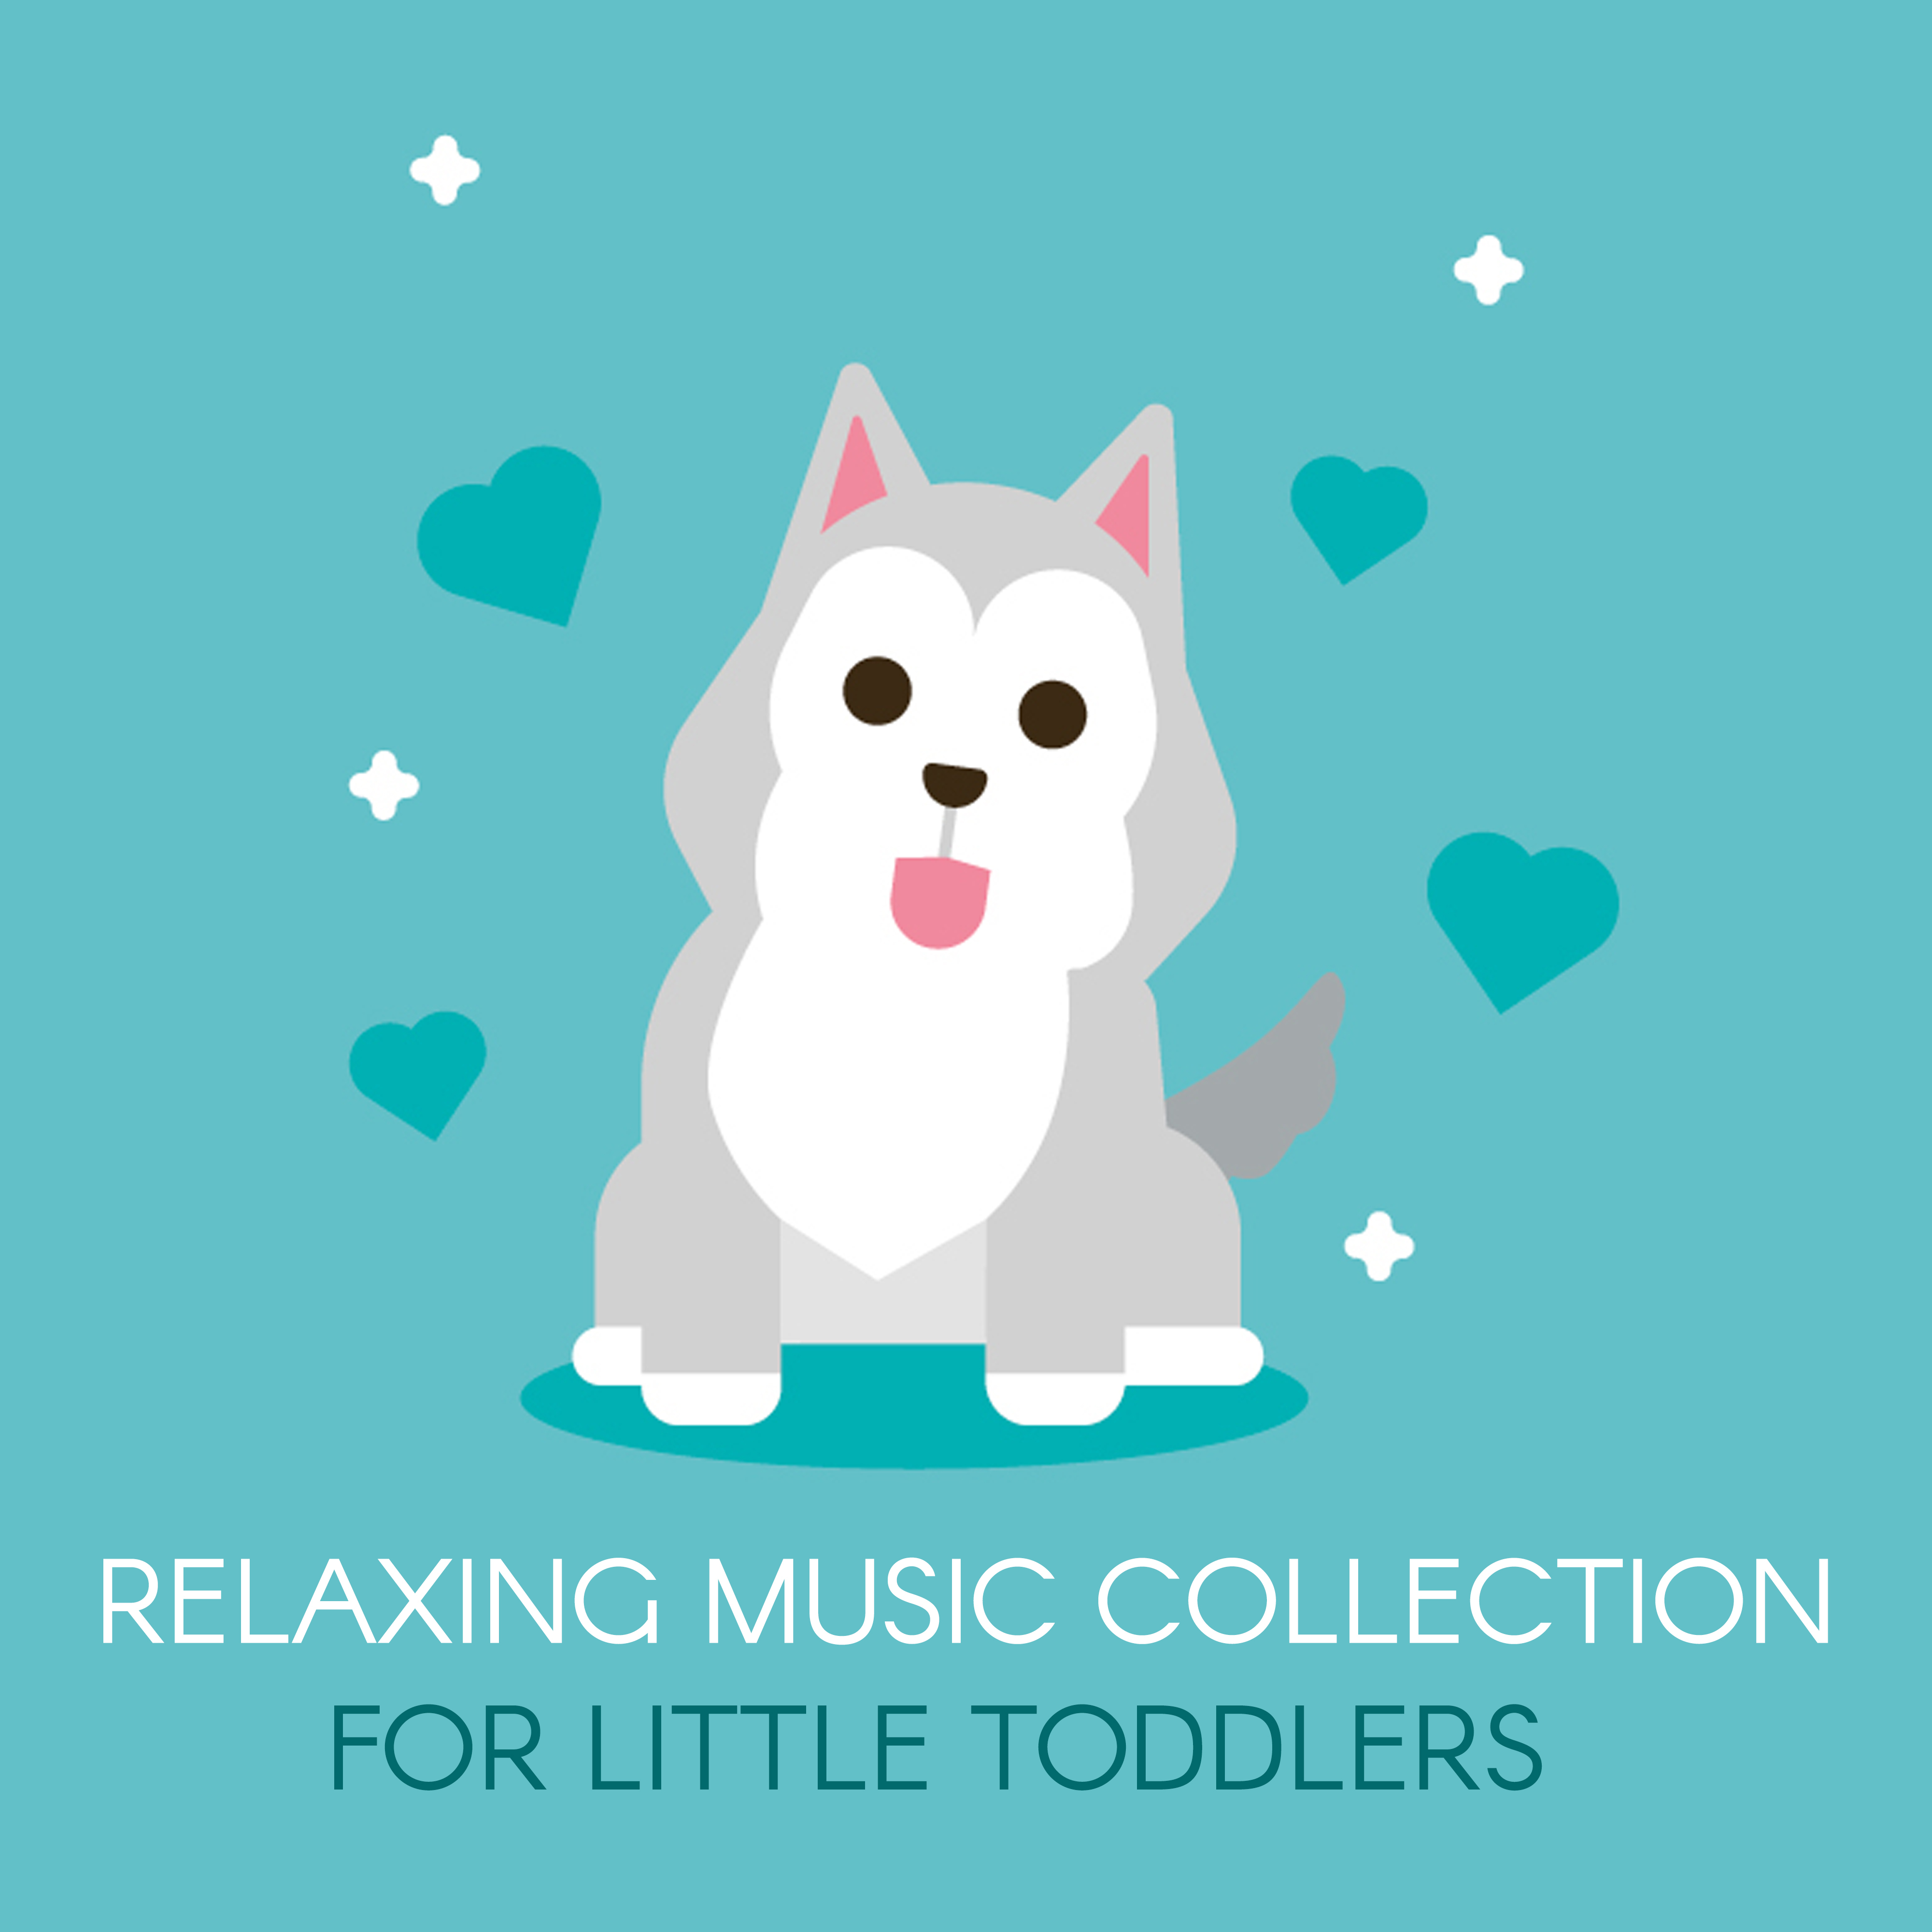 Relaxing Music Collection for Little Toddlers